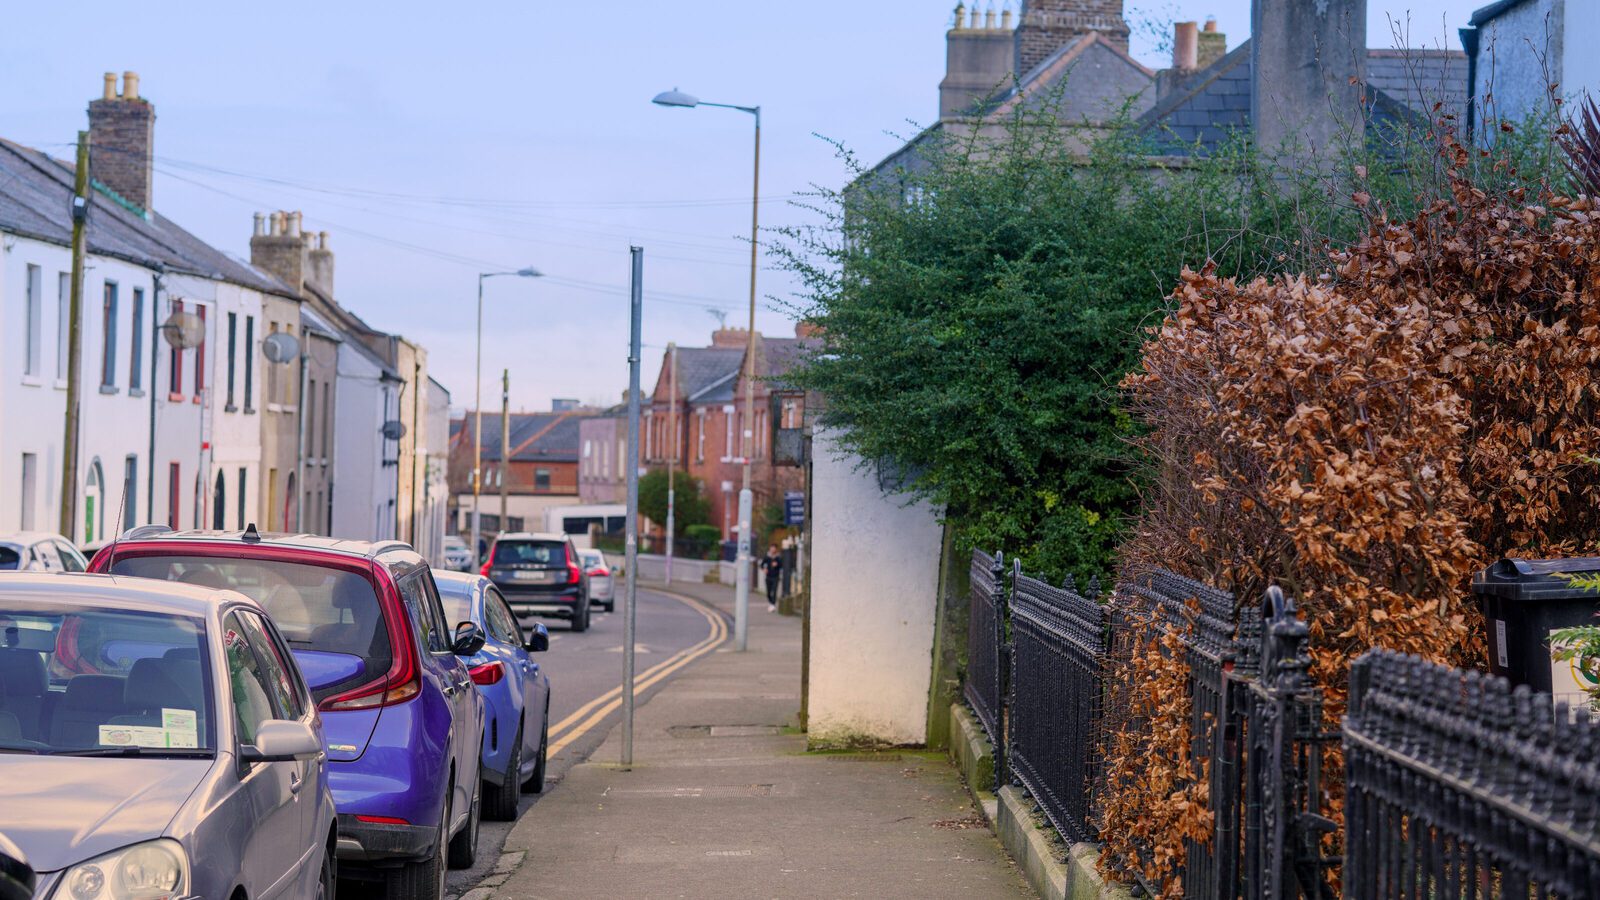 EXPLORING AUGHRIM STREET IN THE STONEYBATTER AREA OF DUBLIN [AND AUGHRIM LANE]-228656-1